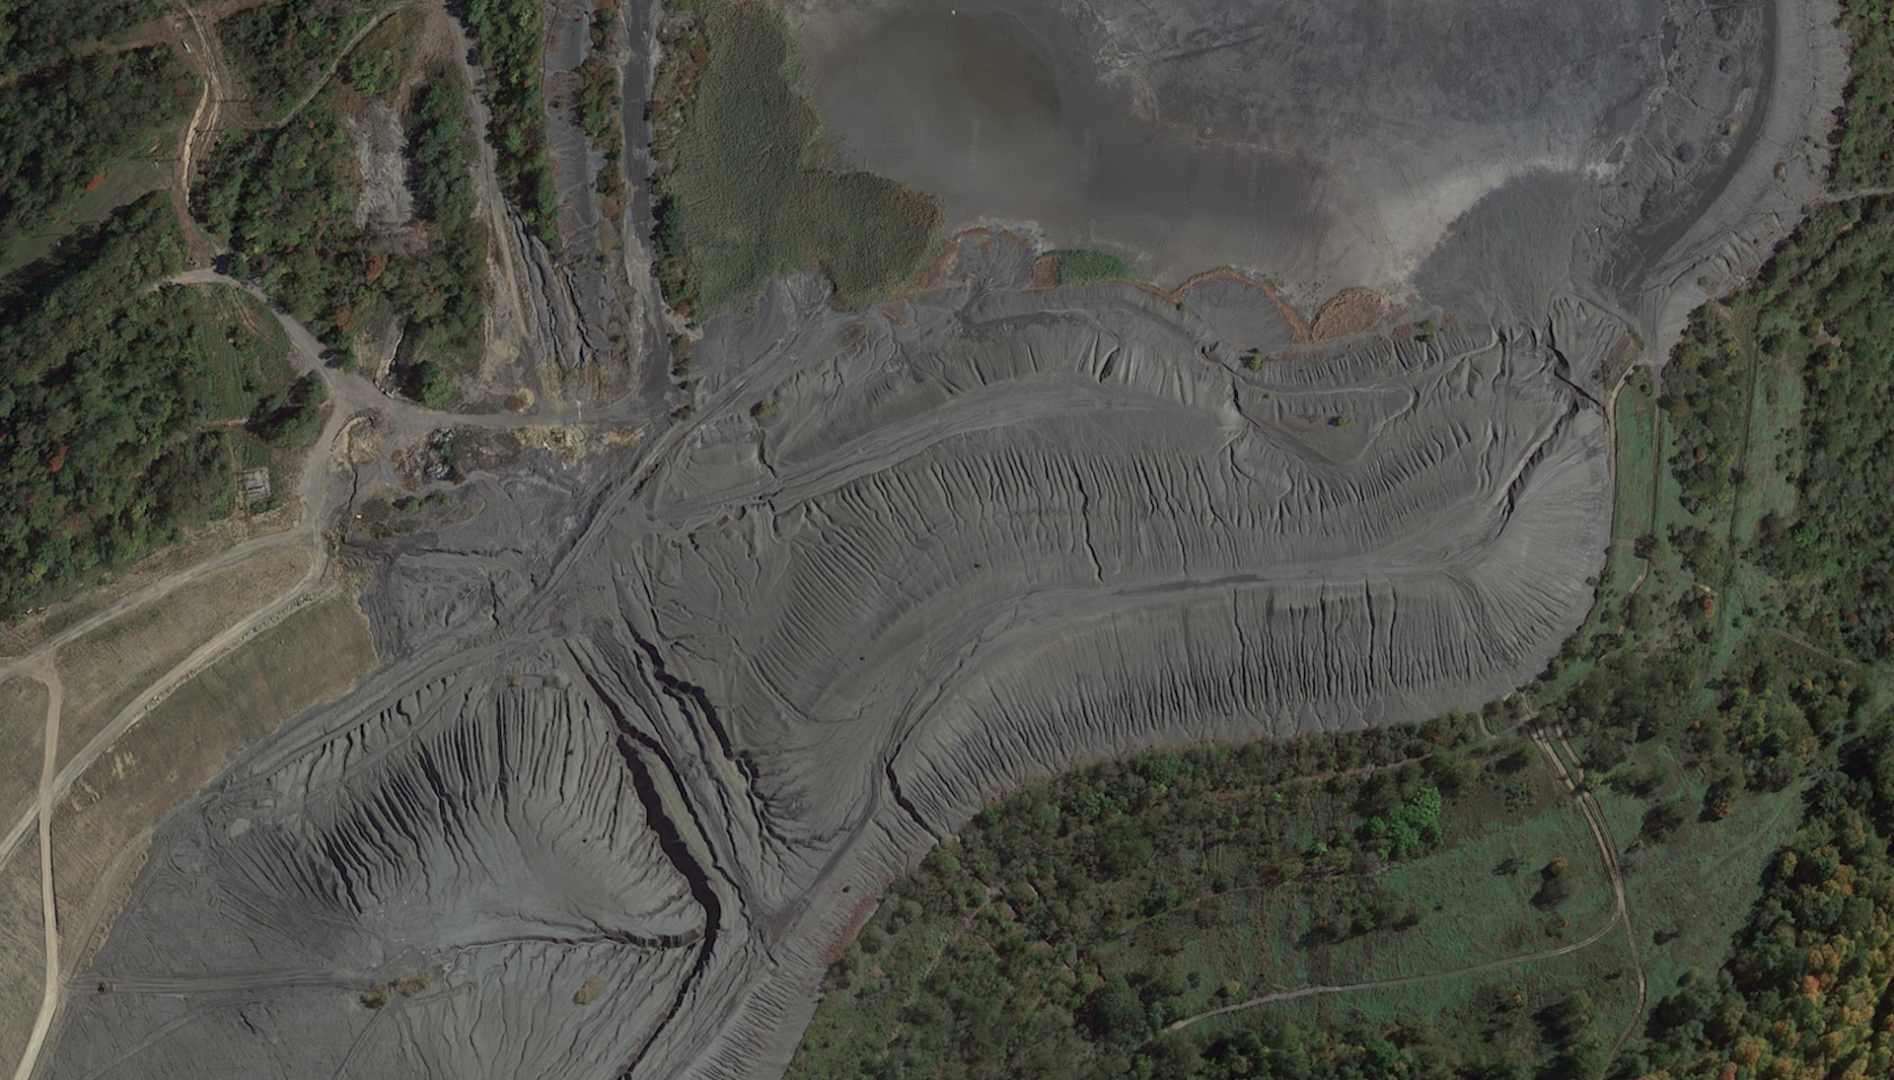 Coal ash near the closed Mitchell Power Plant in Union Township, Washington County, Pa. Image: Google Earth